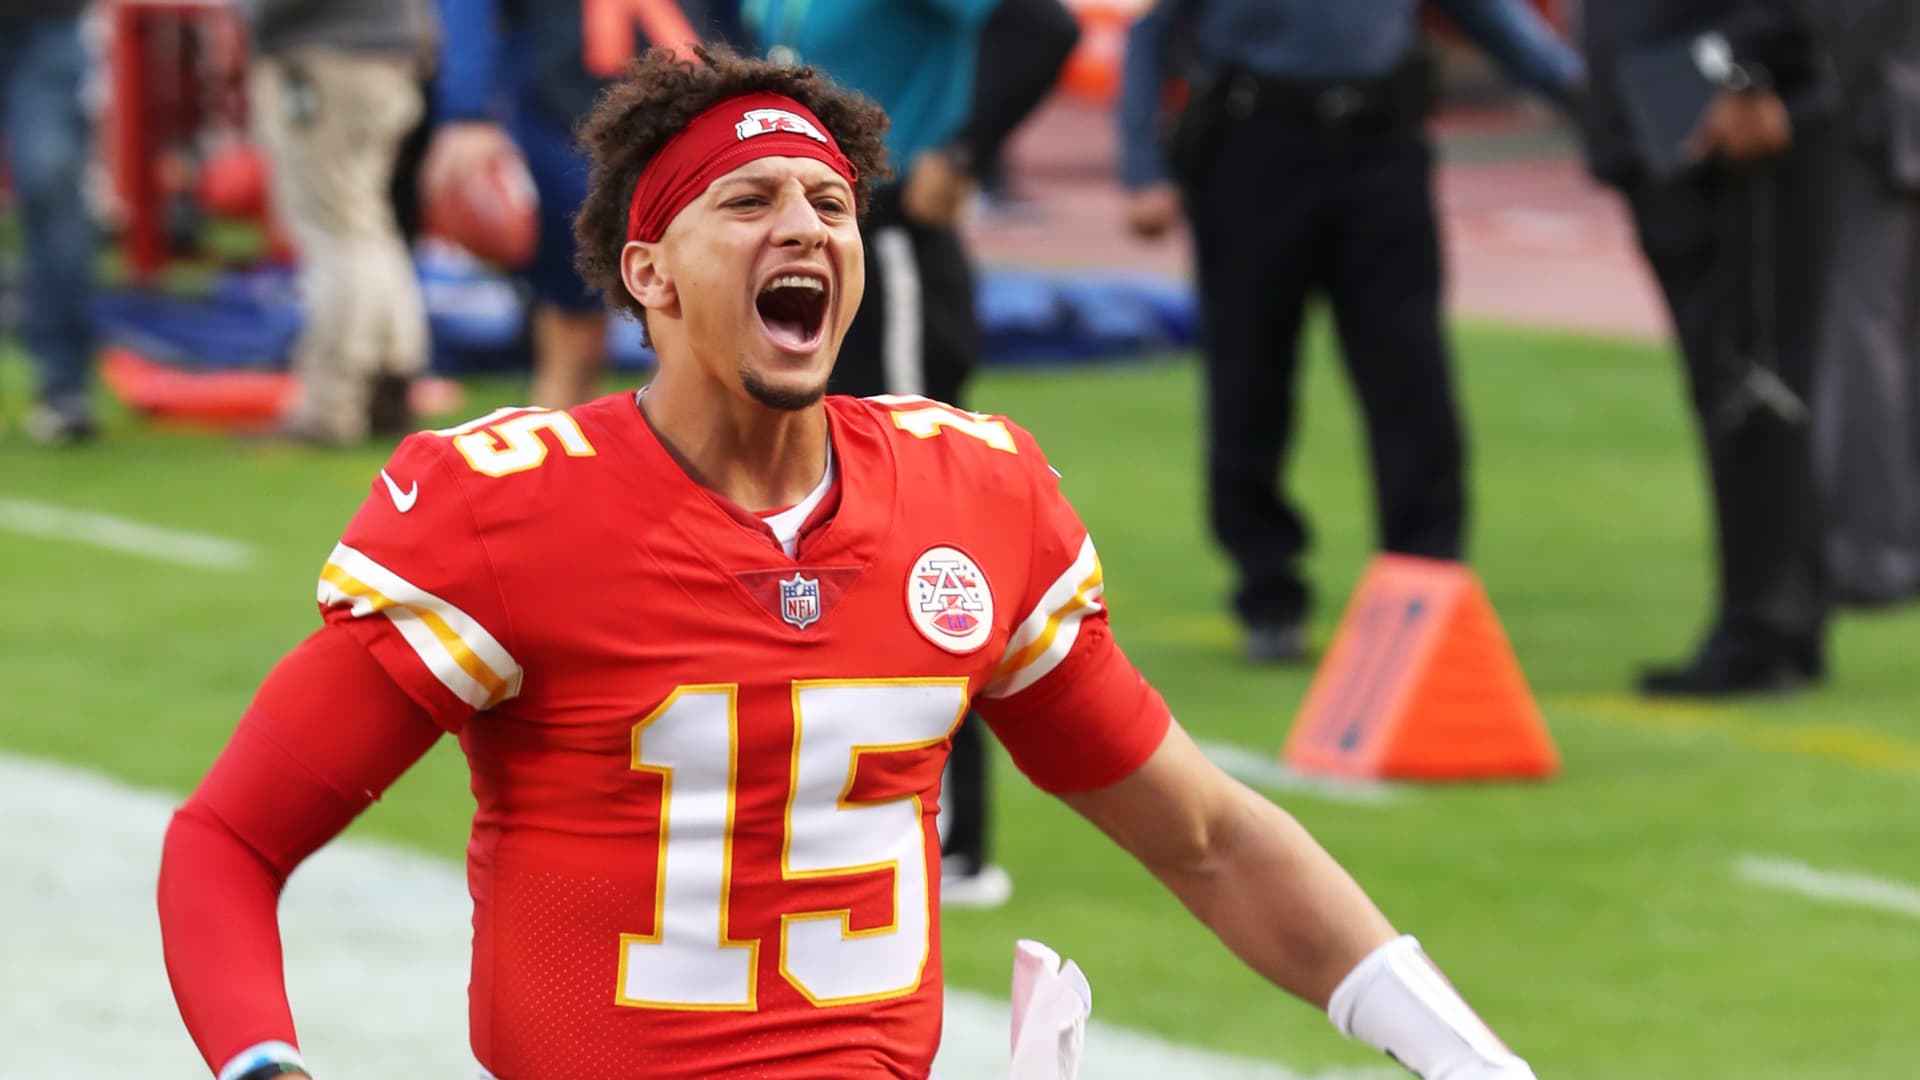 NBC SUNDAY NIGHT FOOTBALL FEATURES BEST & BRIGHTEST IN '23 – MAHOMES VS.  RODGERS, LIONS-CHIEFS & COWBOYS-GIANTS ON KICKOFF WEEKEND; PEACOCK IS  EXCLUSIVE HOME TO NFL GAME FOR FIRST TIME ON SAT.